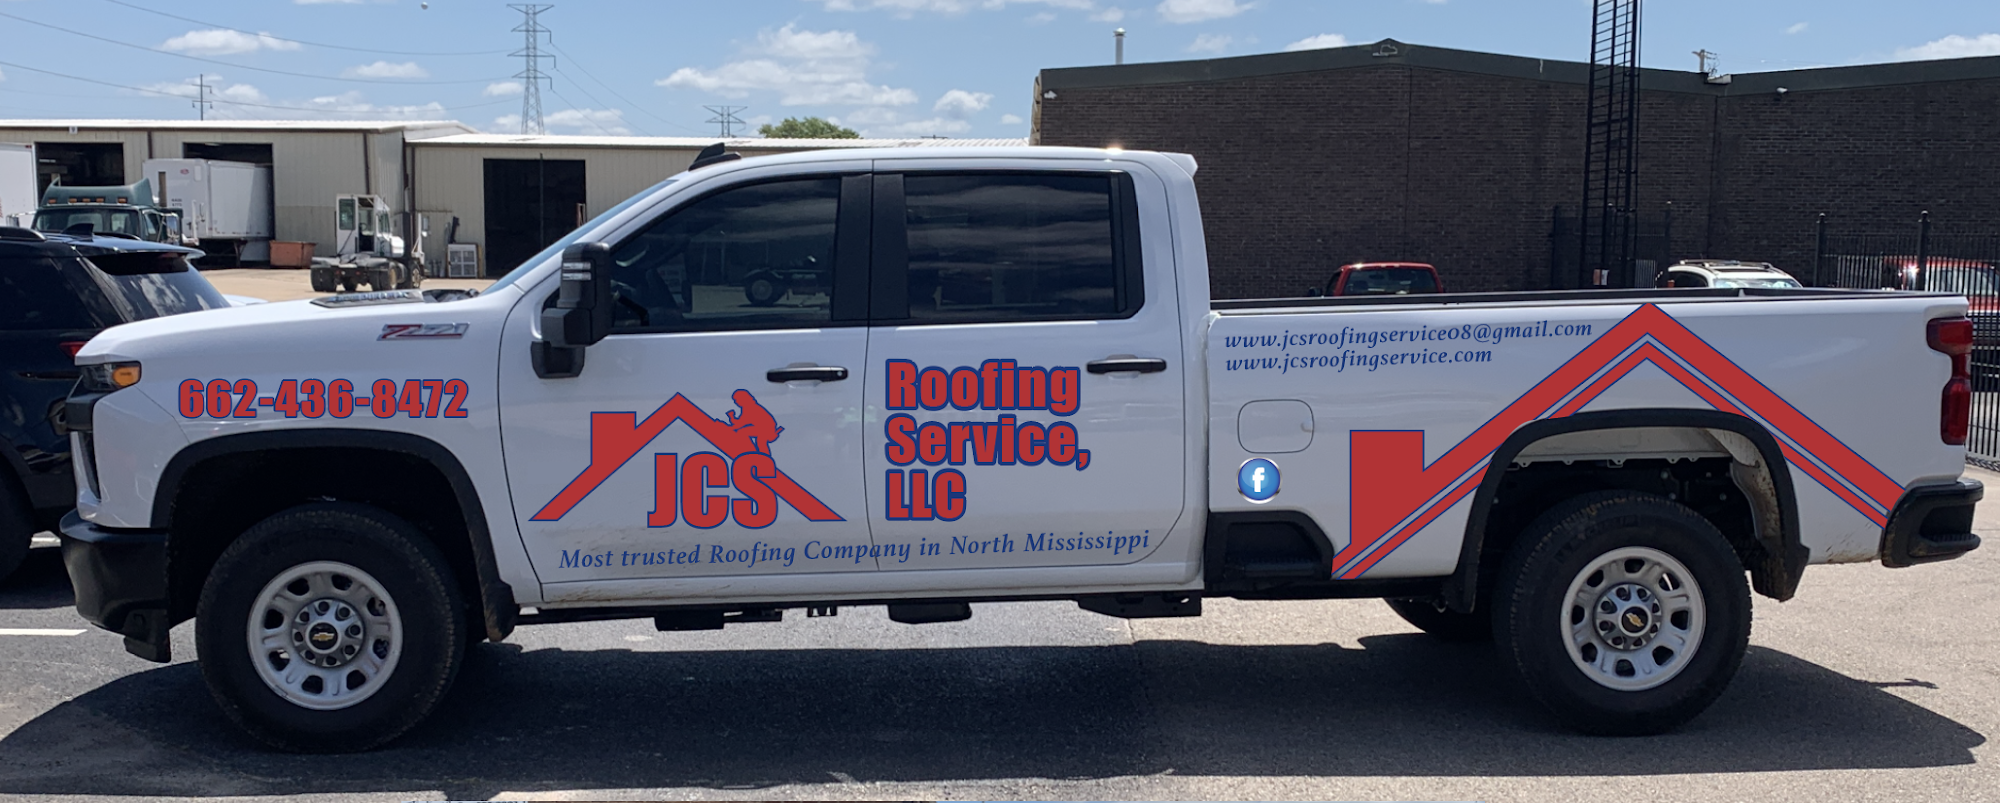 JCS Roofing Service 207 S Maple St, Aberdeen Mississippi 39730